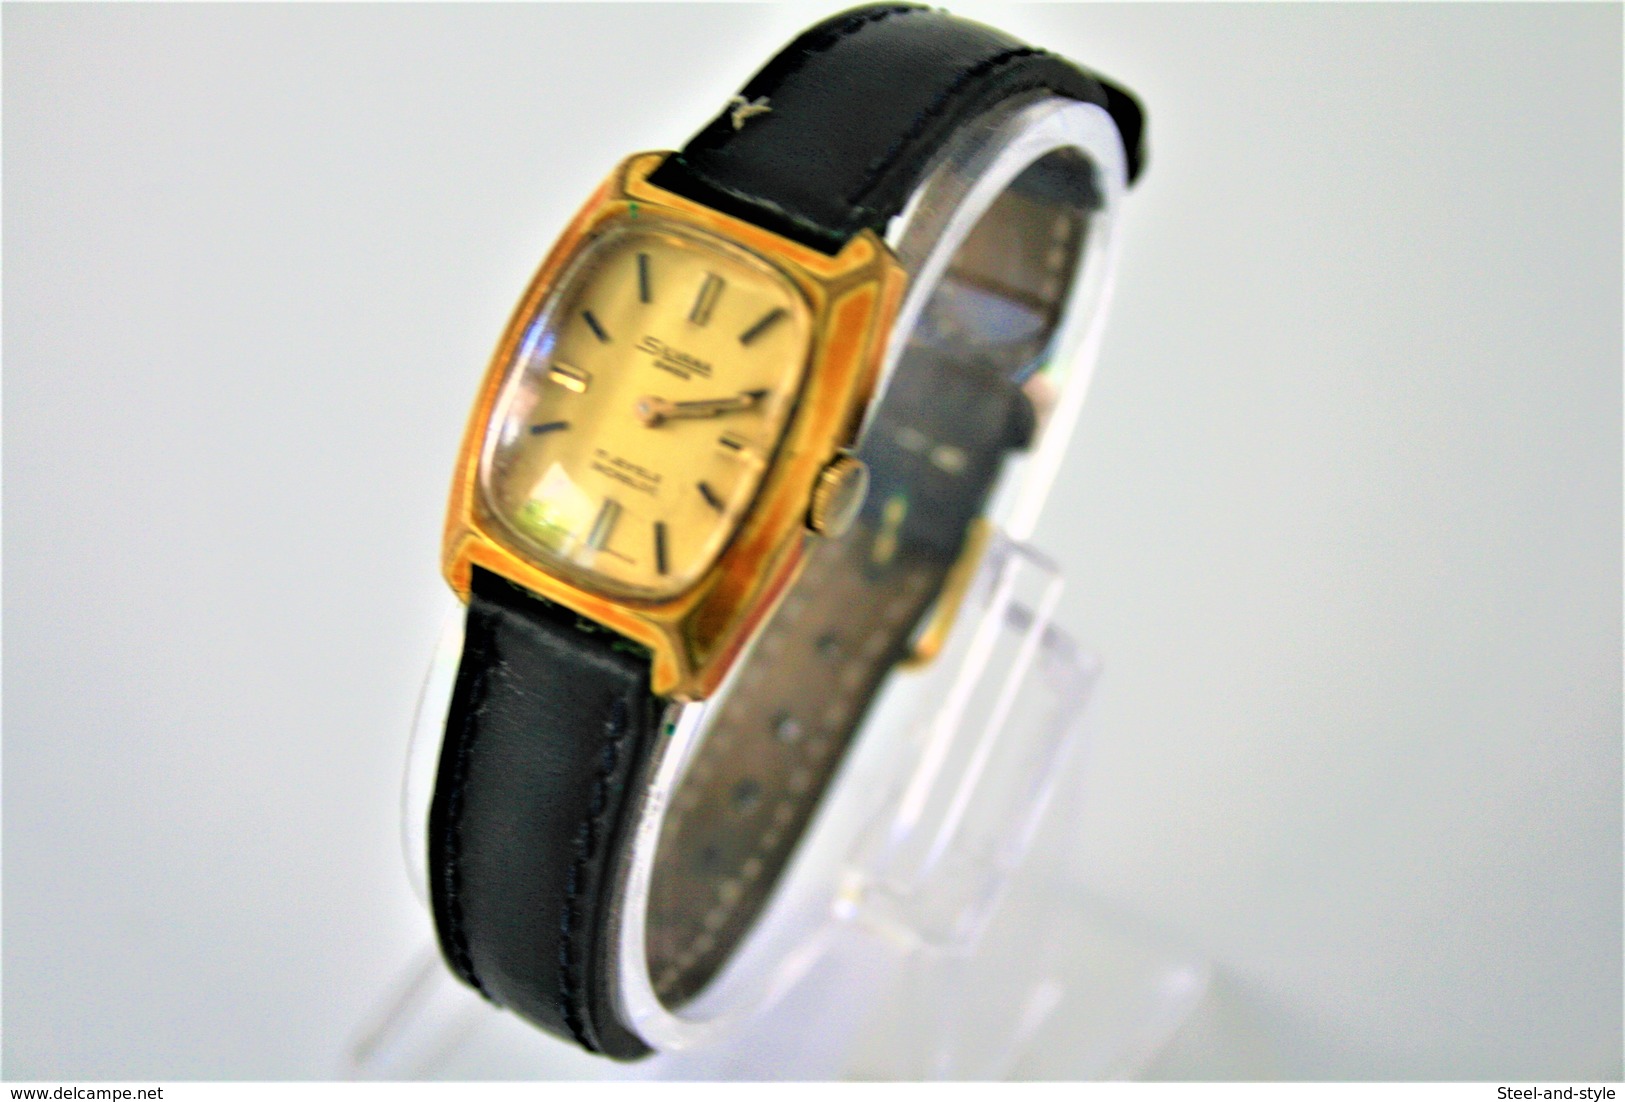 Watches : SILVANA GOLD PLATED LADIES HAND WIND LIC BAND - Original - 1960's - Running - Excelent Condition - Orologi Moderni